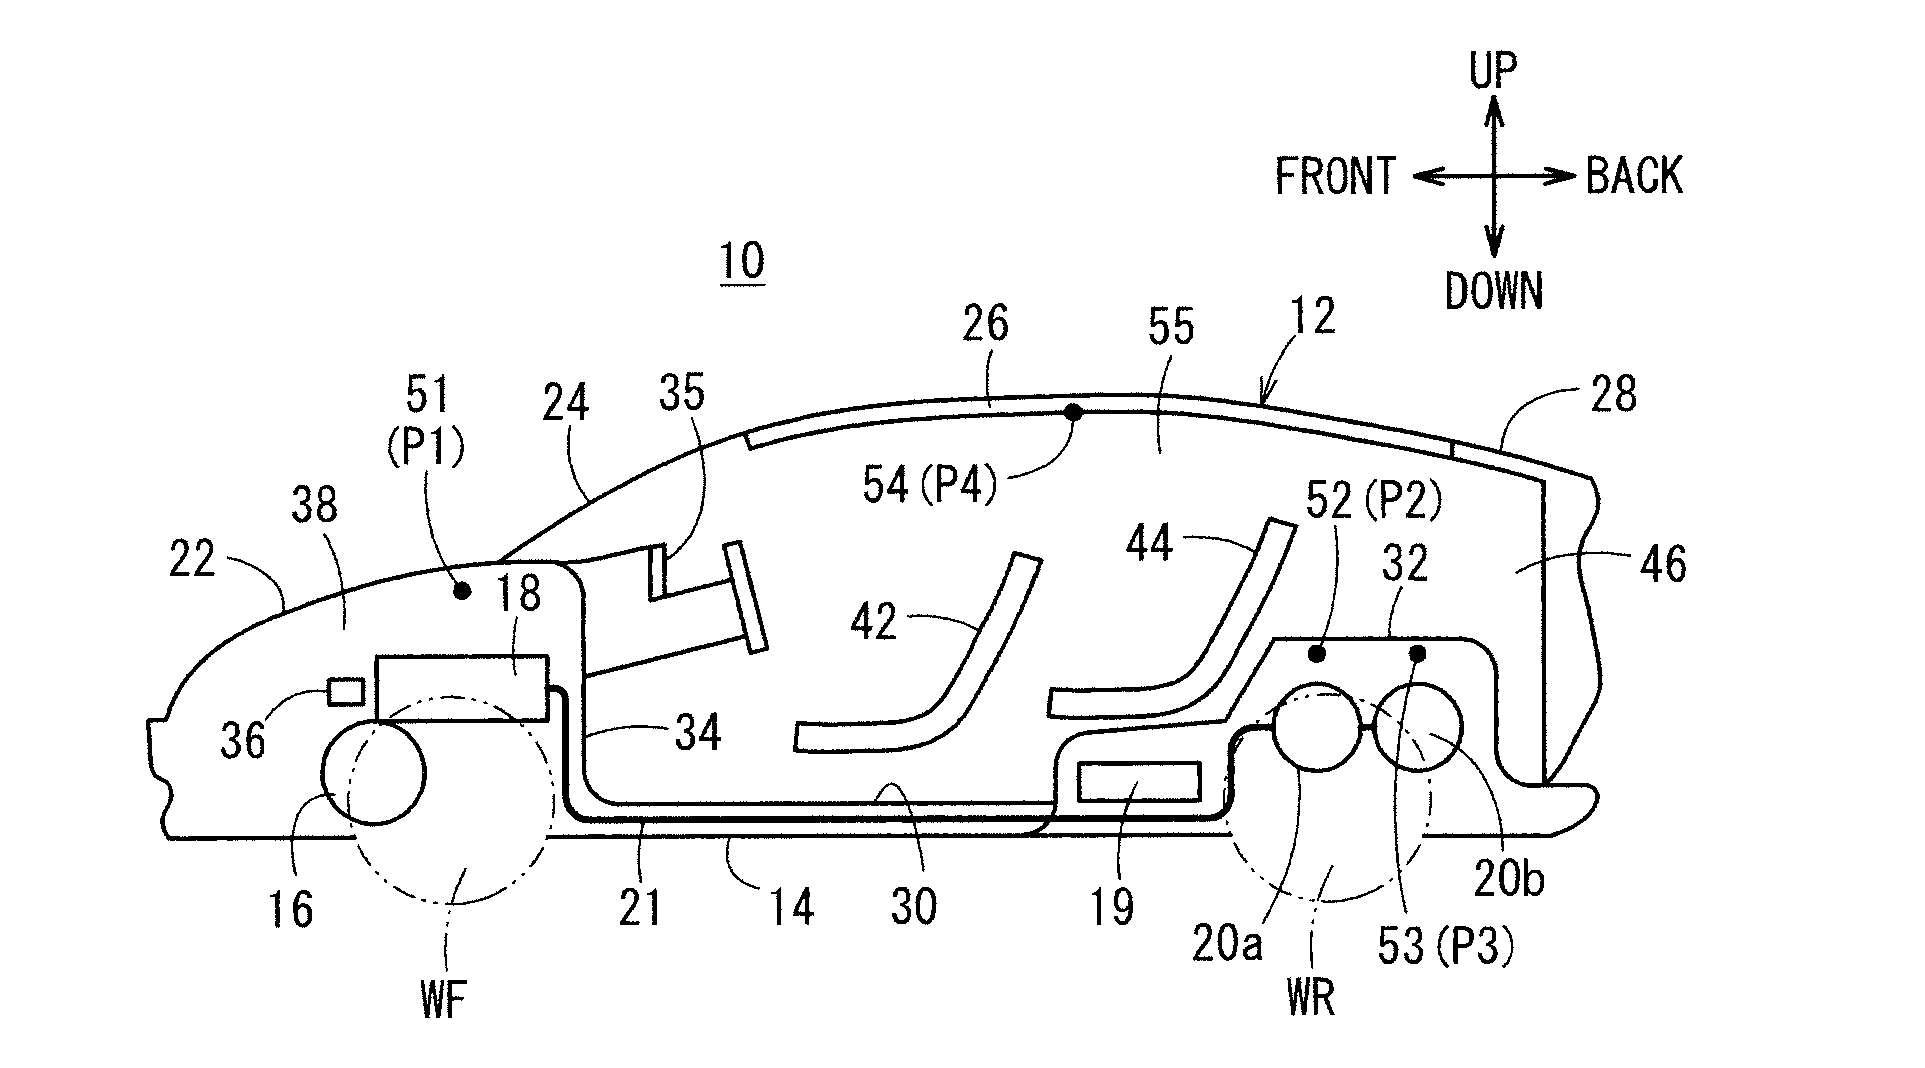 Gas monitoring system and gas monitoring method